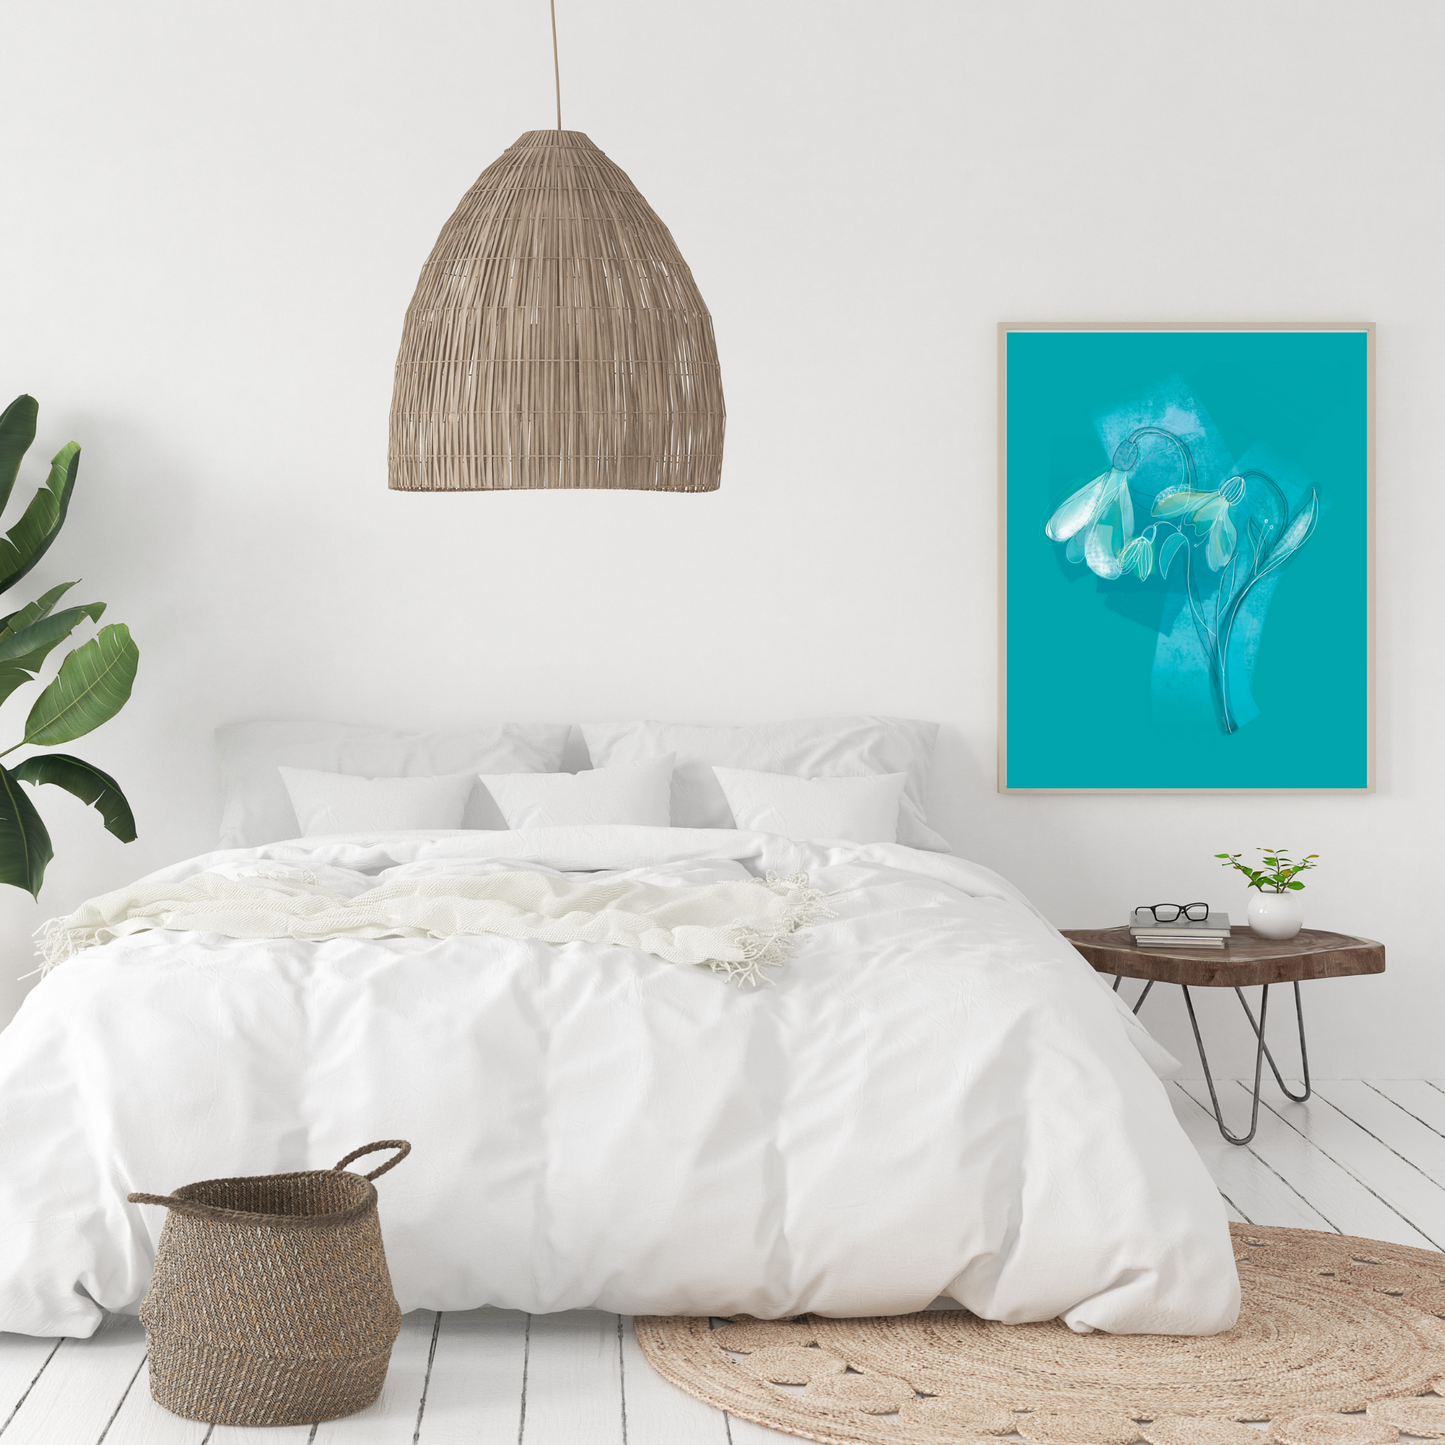 An example of the Snowdrop painting by ArisaTeam in a bedroom